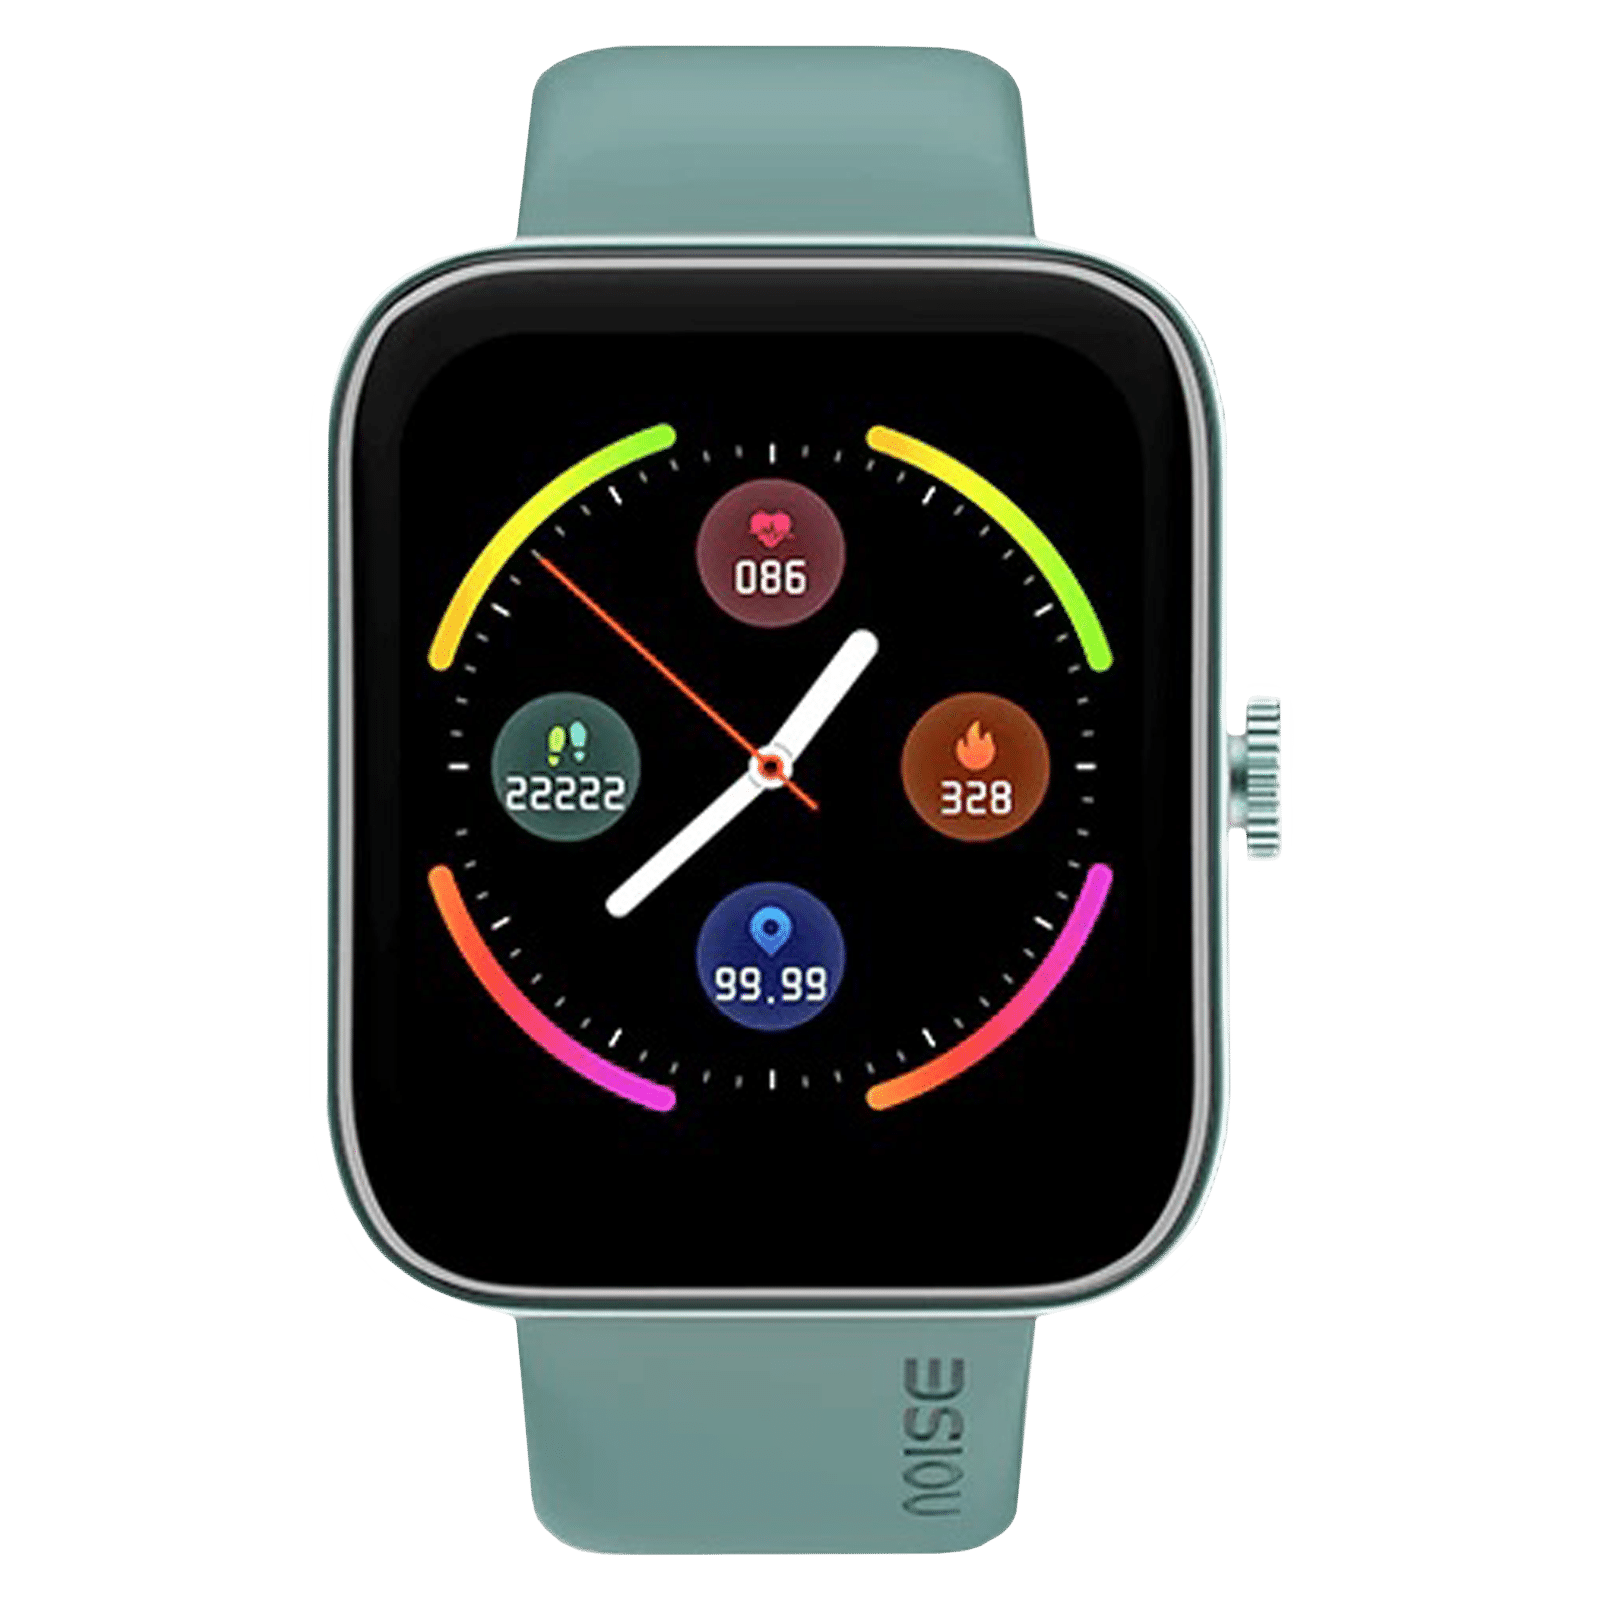 Buy Noise ColorFit Pulse Go Buzz Bluetooth Calling Smart Watch with IP68  Rating, 150+ Customized Watch Faces, 100+ Sports Modes (Black) at  suryaelectronics.in